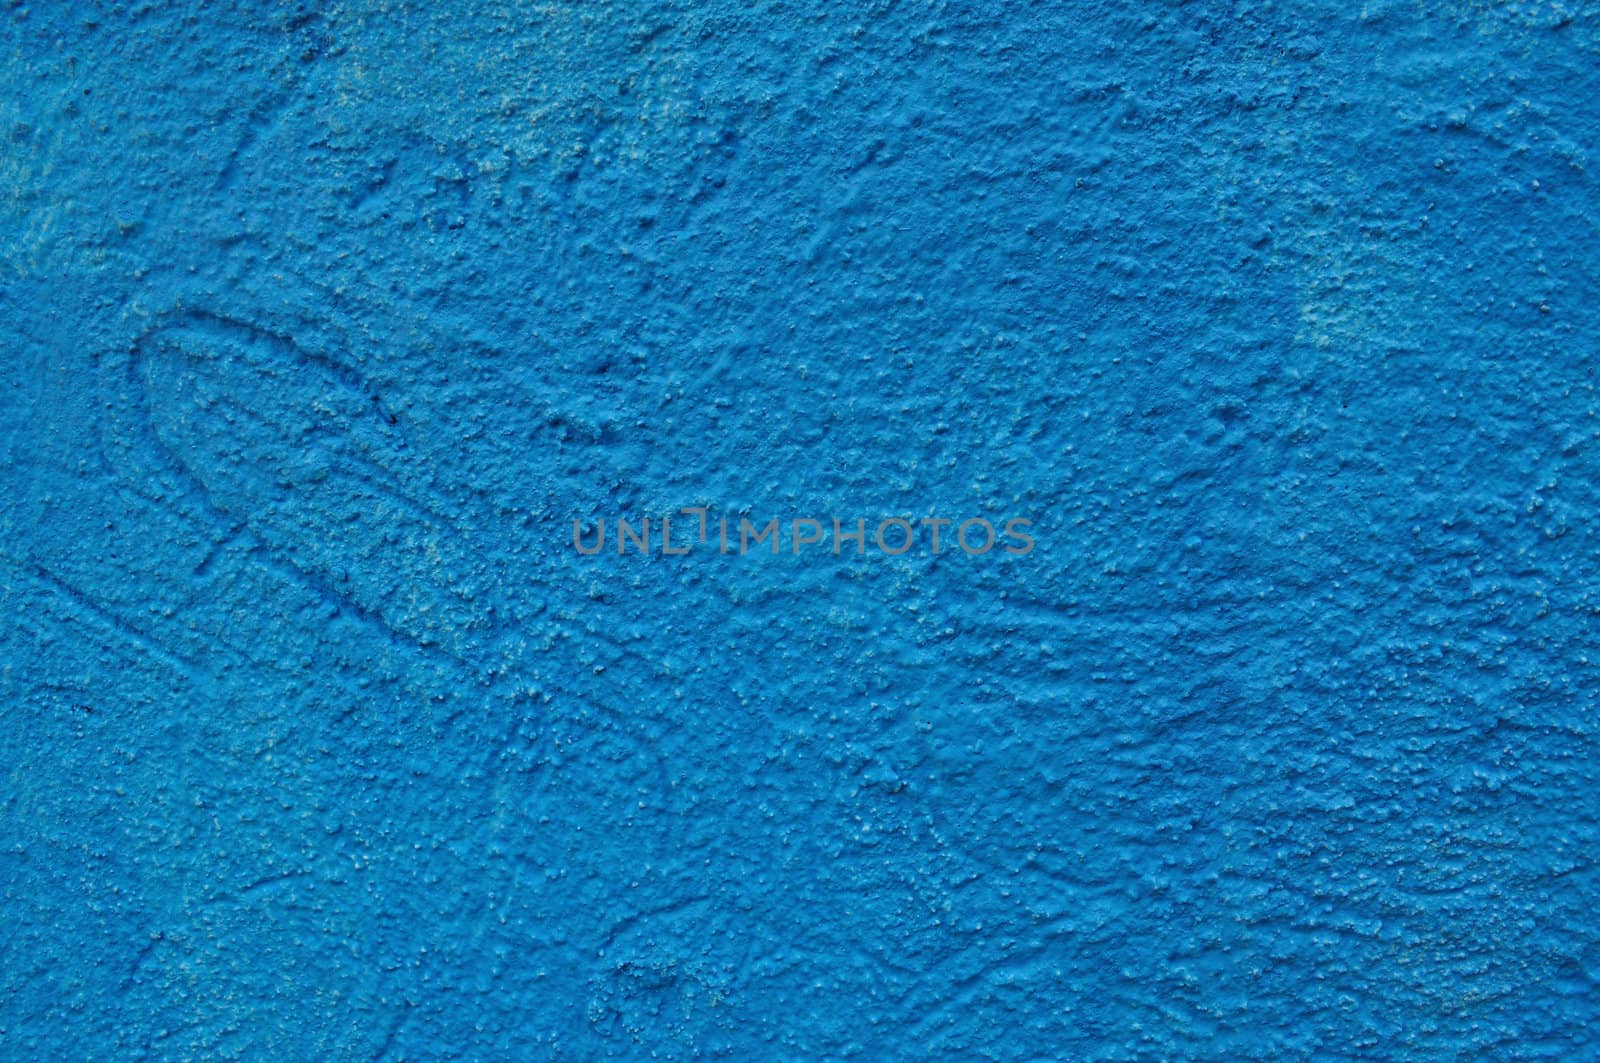 concrete wall painted blue